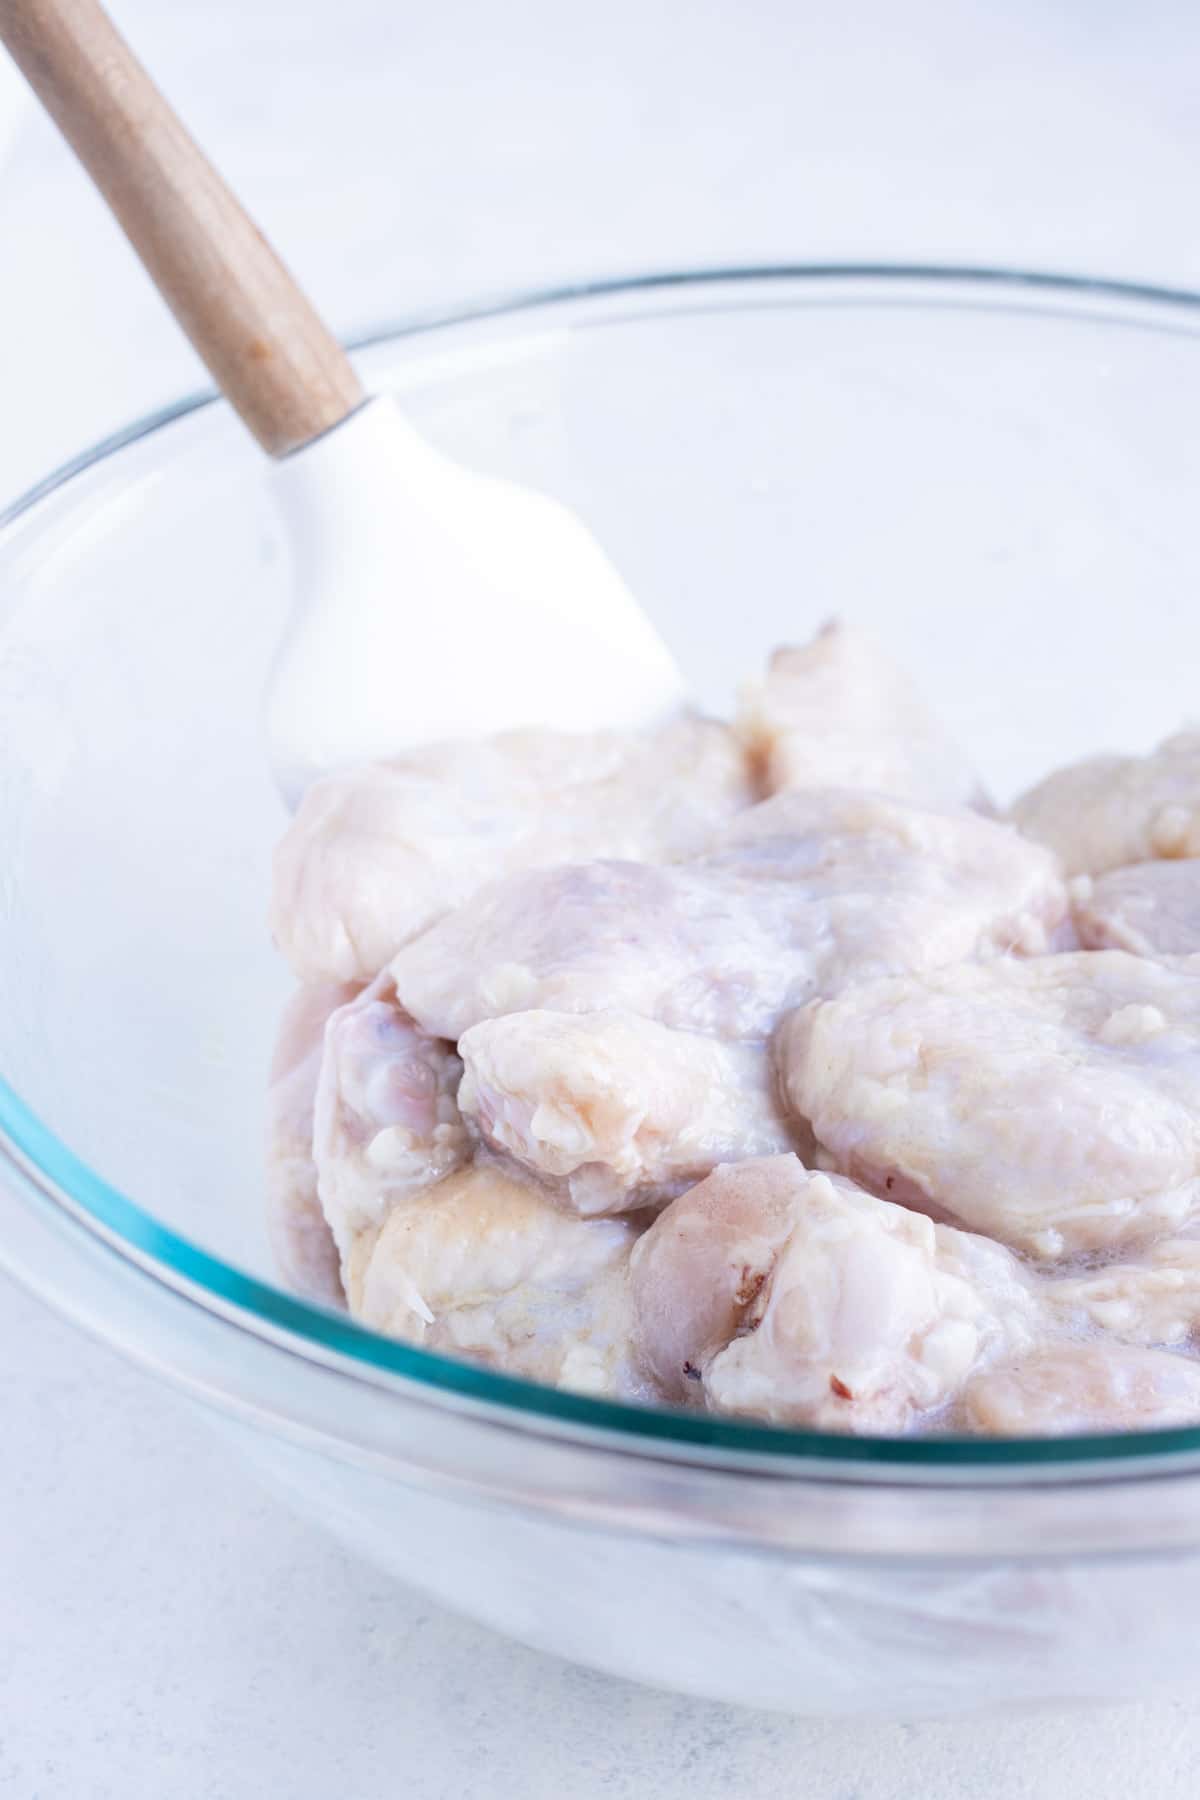 Raw wings and drumsticks are tossed in the seasoning and oil.